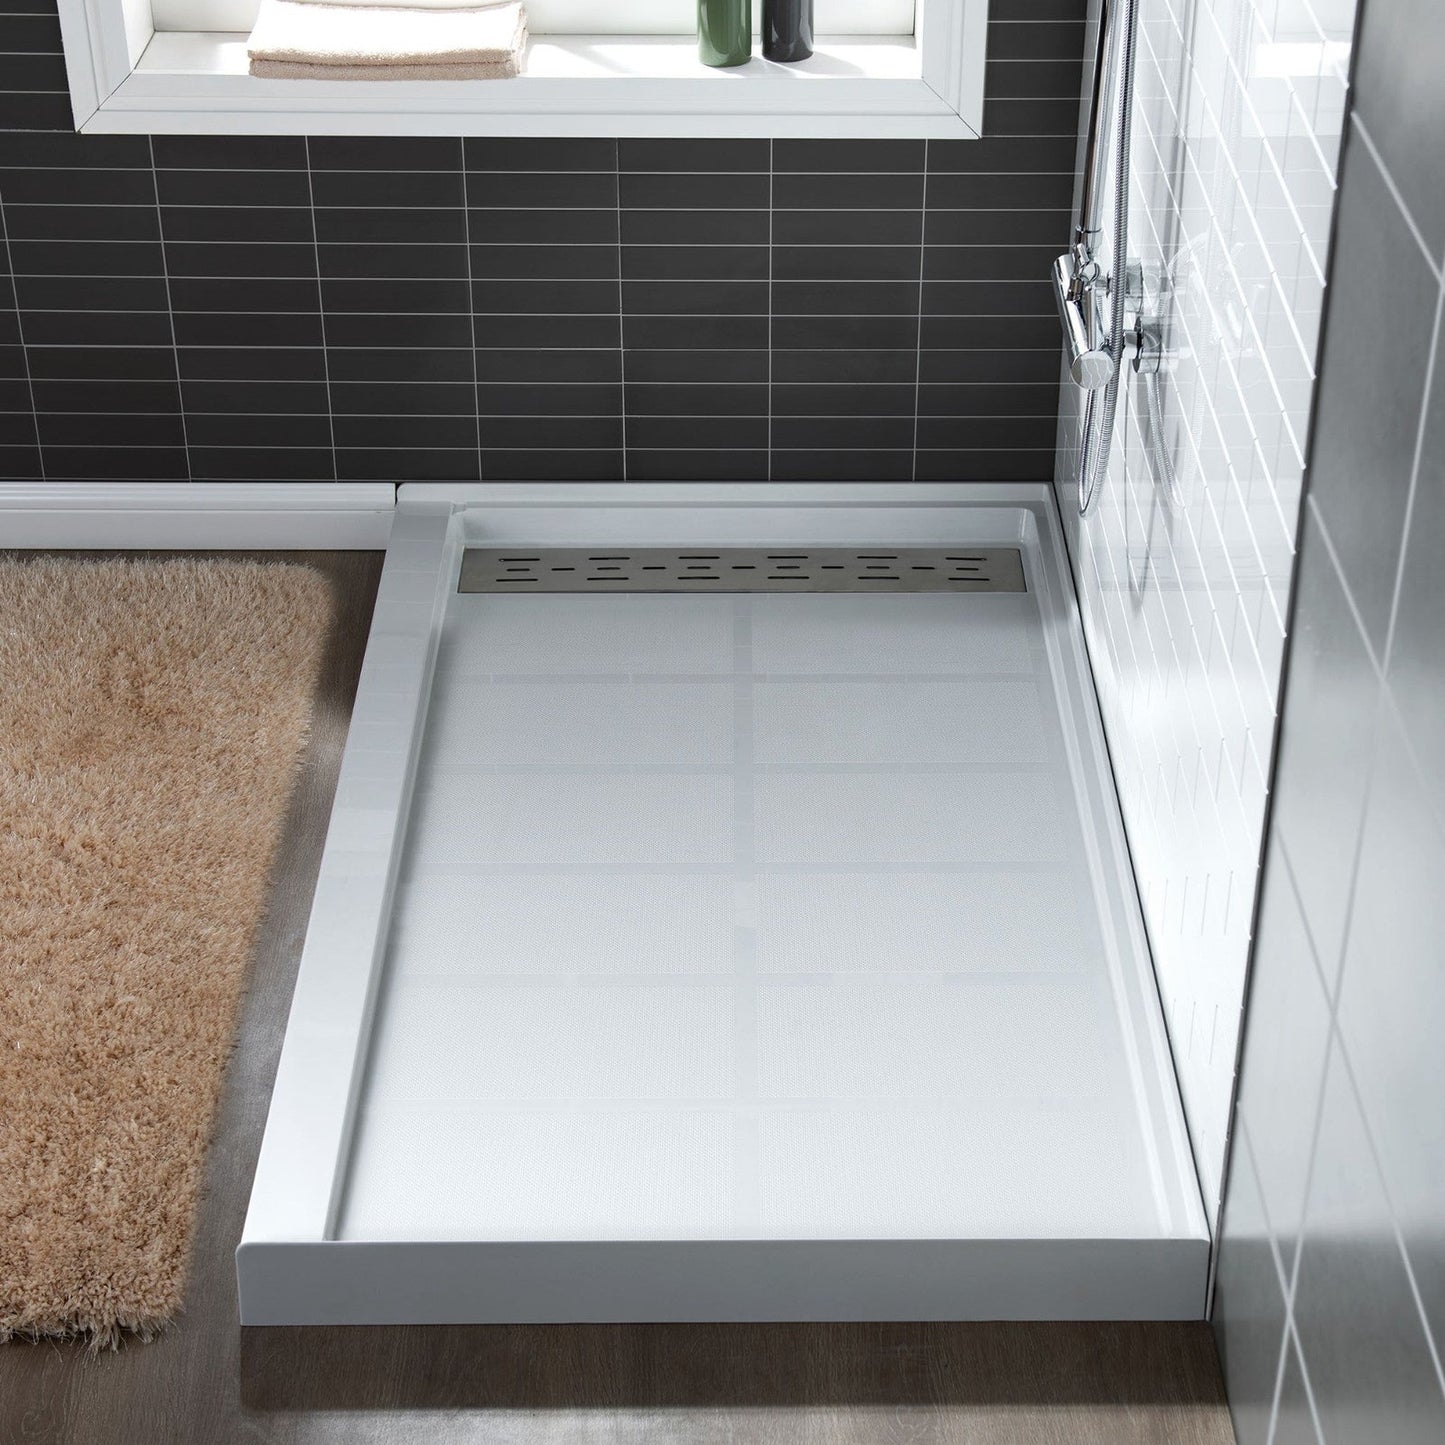 WoodBridge 60" x 34" White Solid Surface Shower Base Left Drain Location With Brushed Nickel Trench Drain Cover